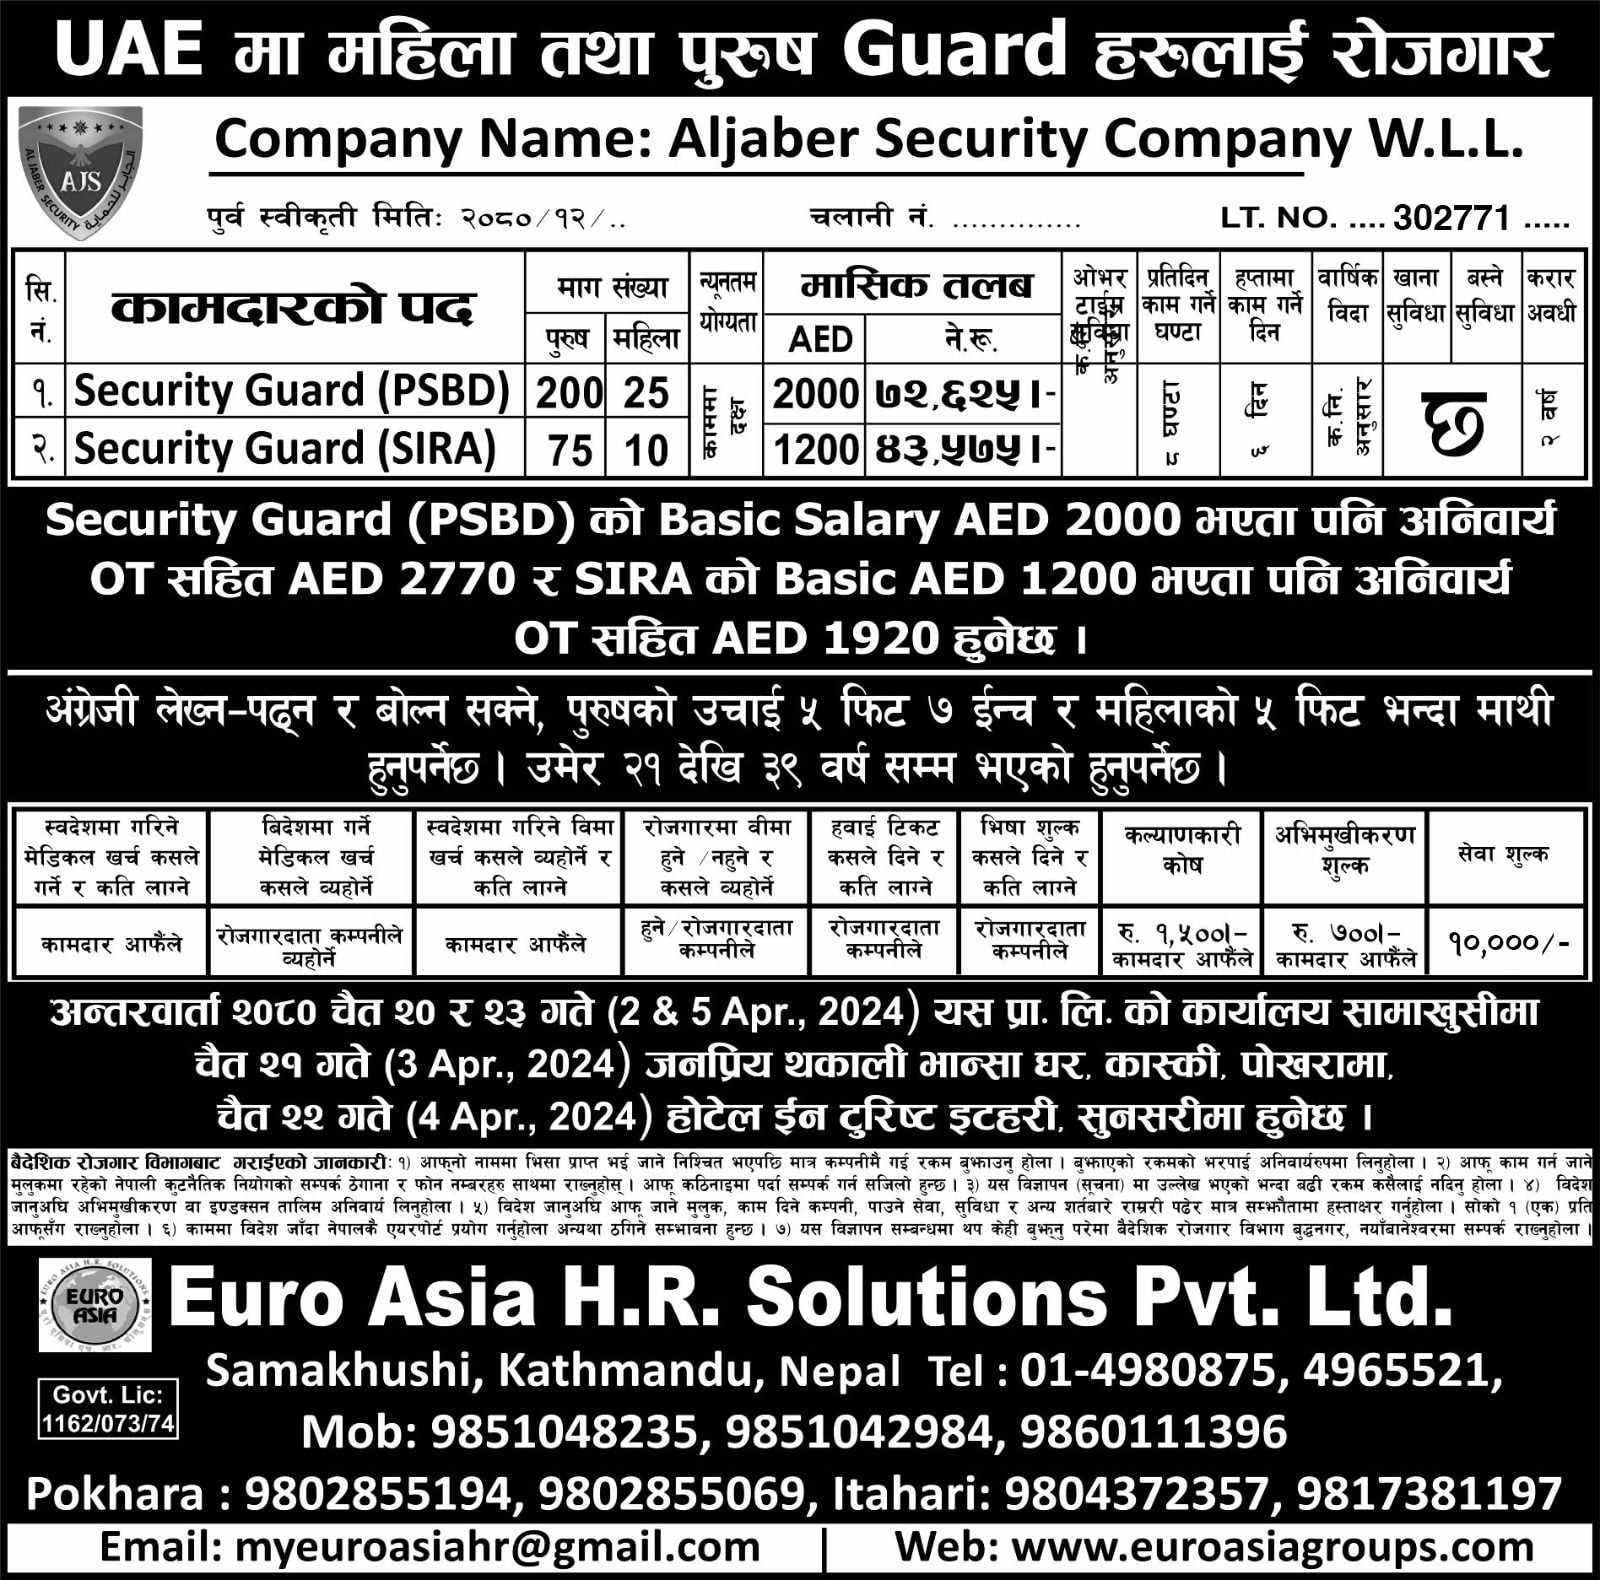 Article Image of job Career Opportunity in UAE, Demand for SIRA and PSBD security Guard